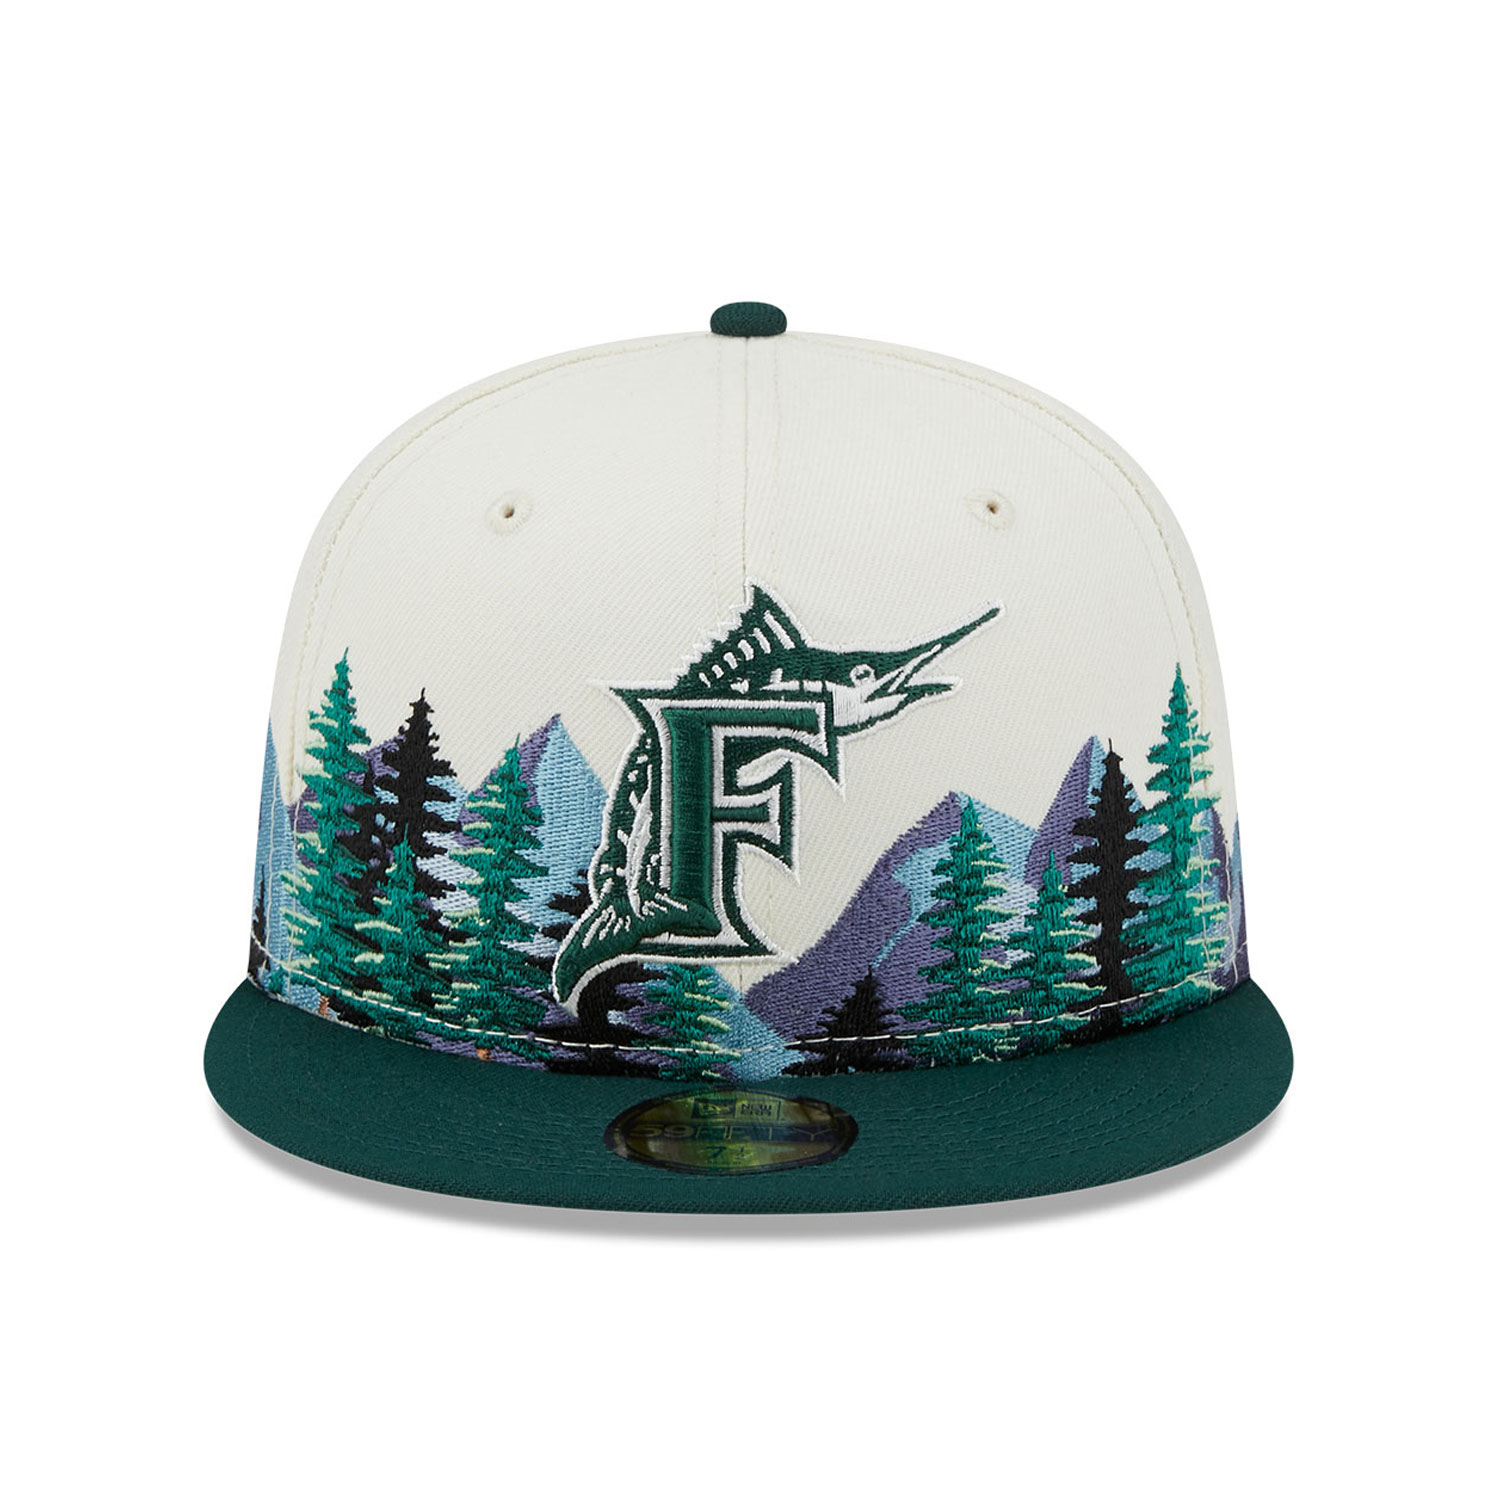 Florida Marlins Outdoor White 59FIFTY Fitted